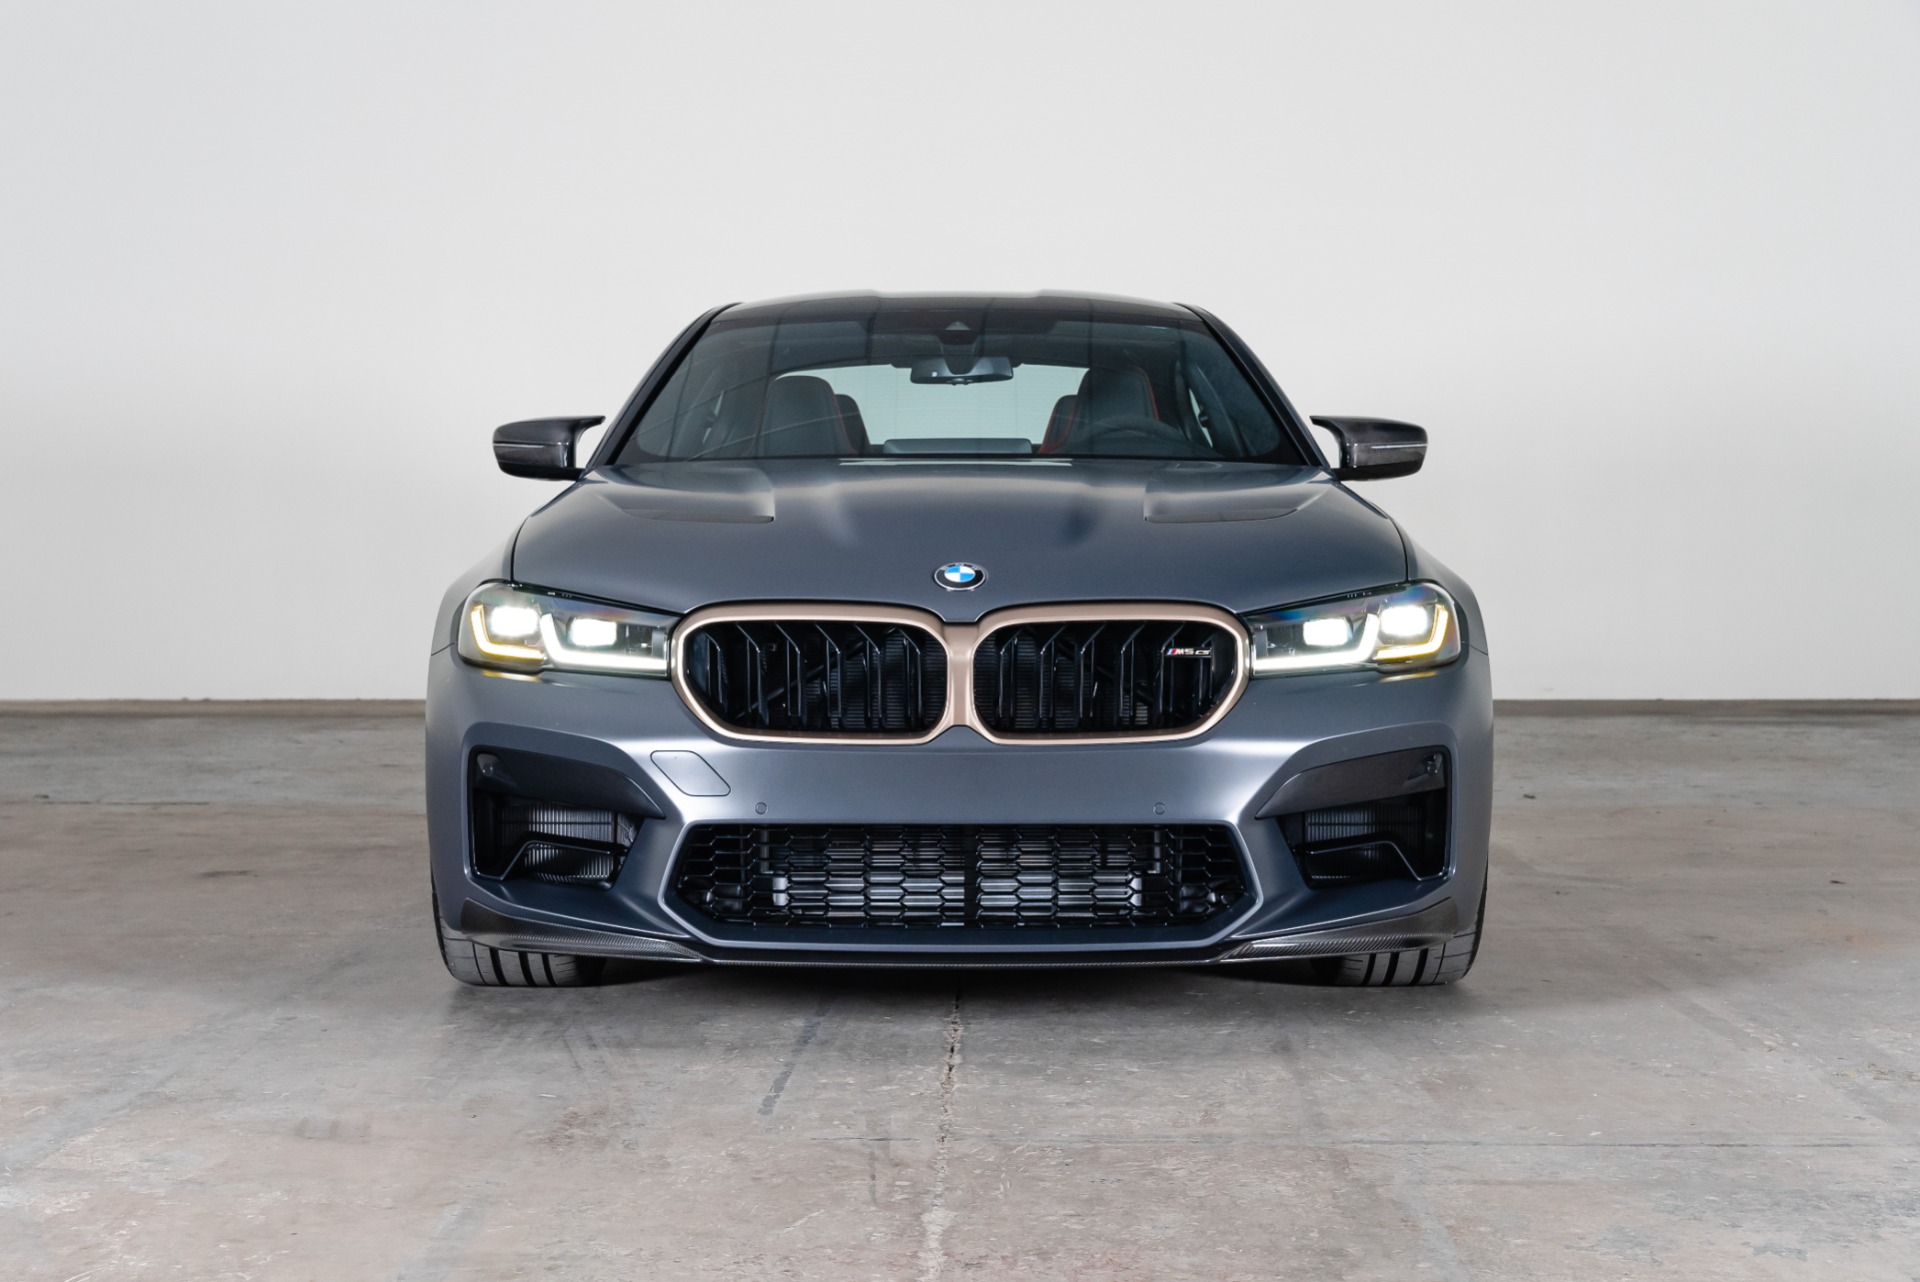 Used 2022 BMW M5 CS For Sale (Sold)  West Coast Exotic Cars Stock #C2569